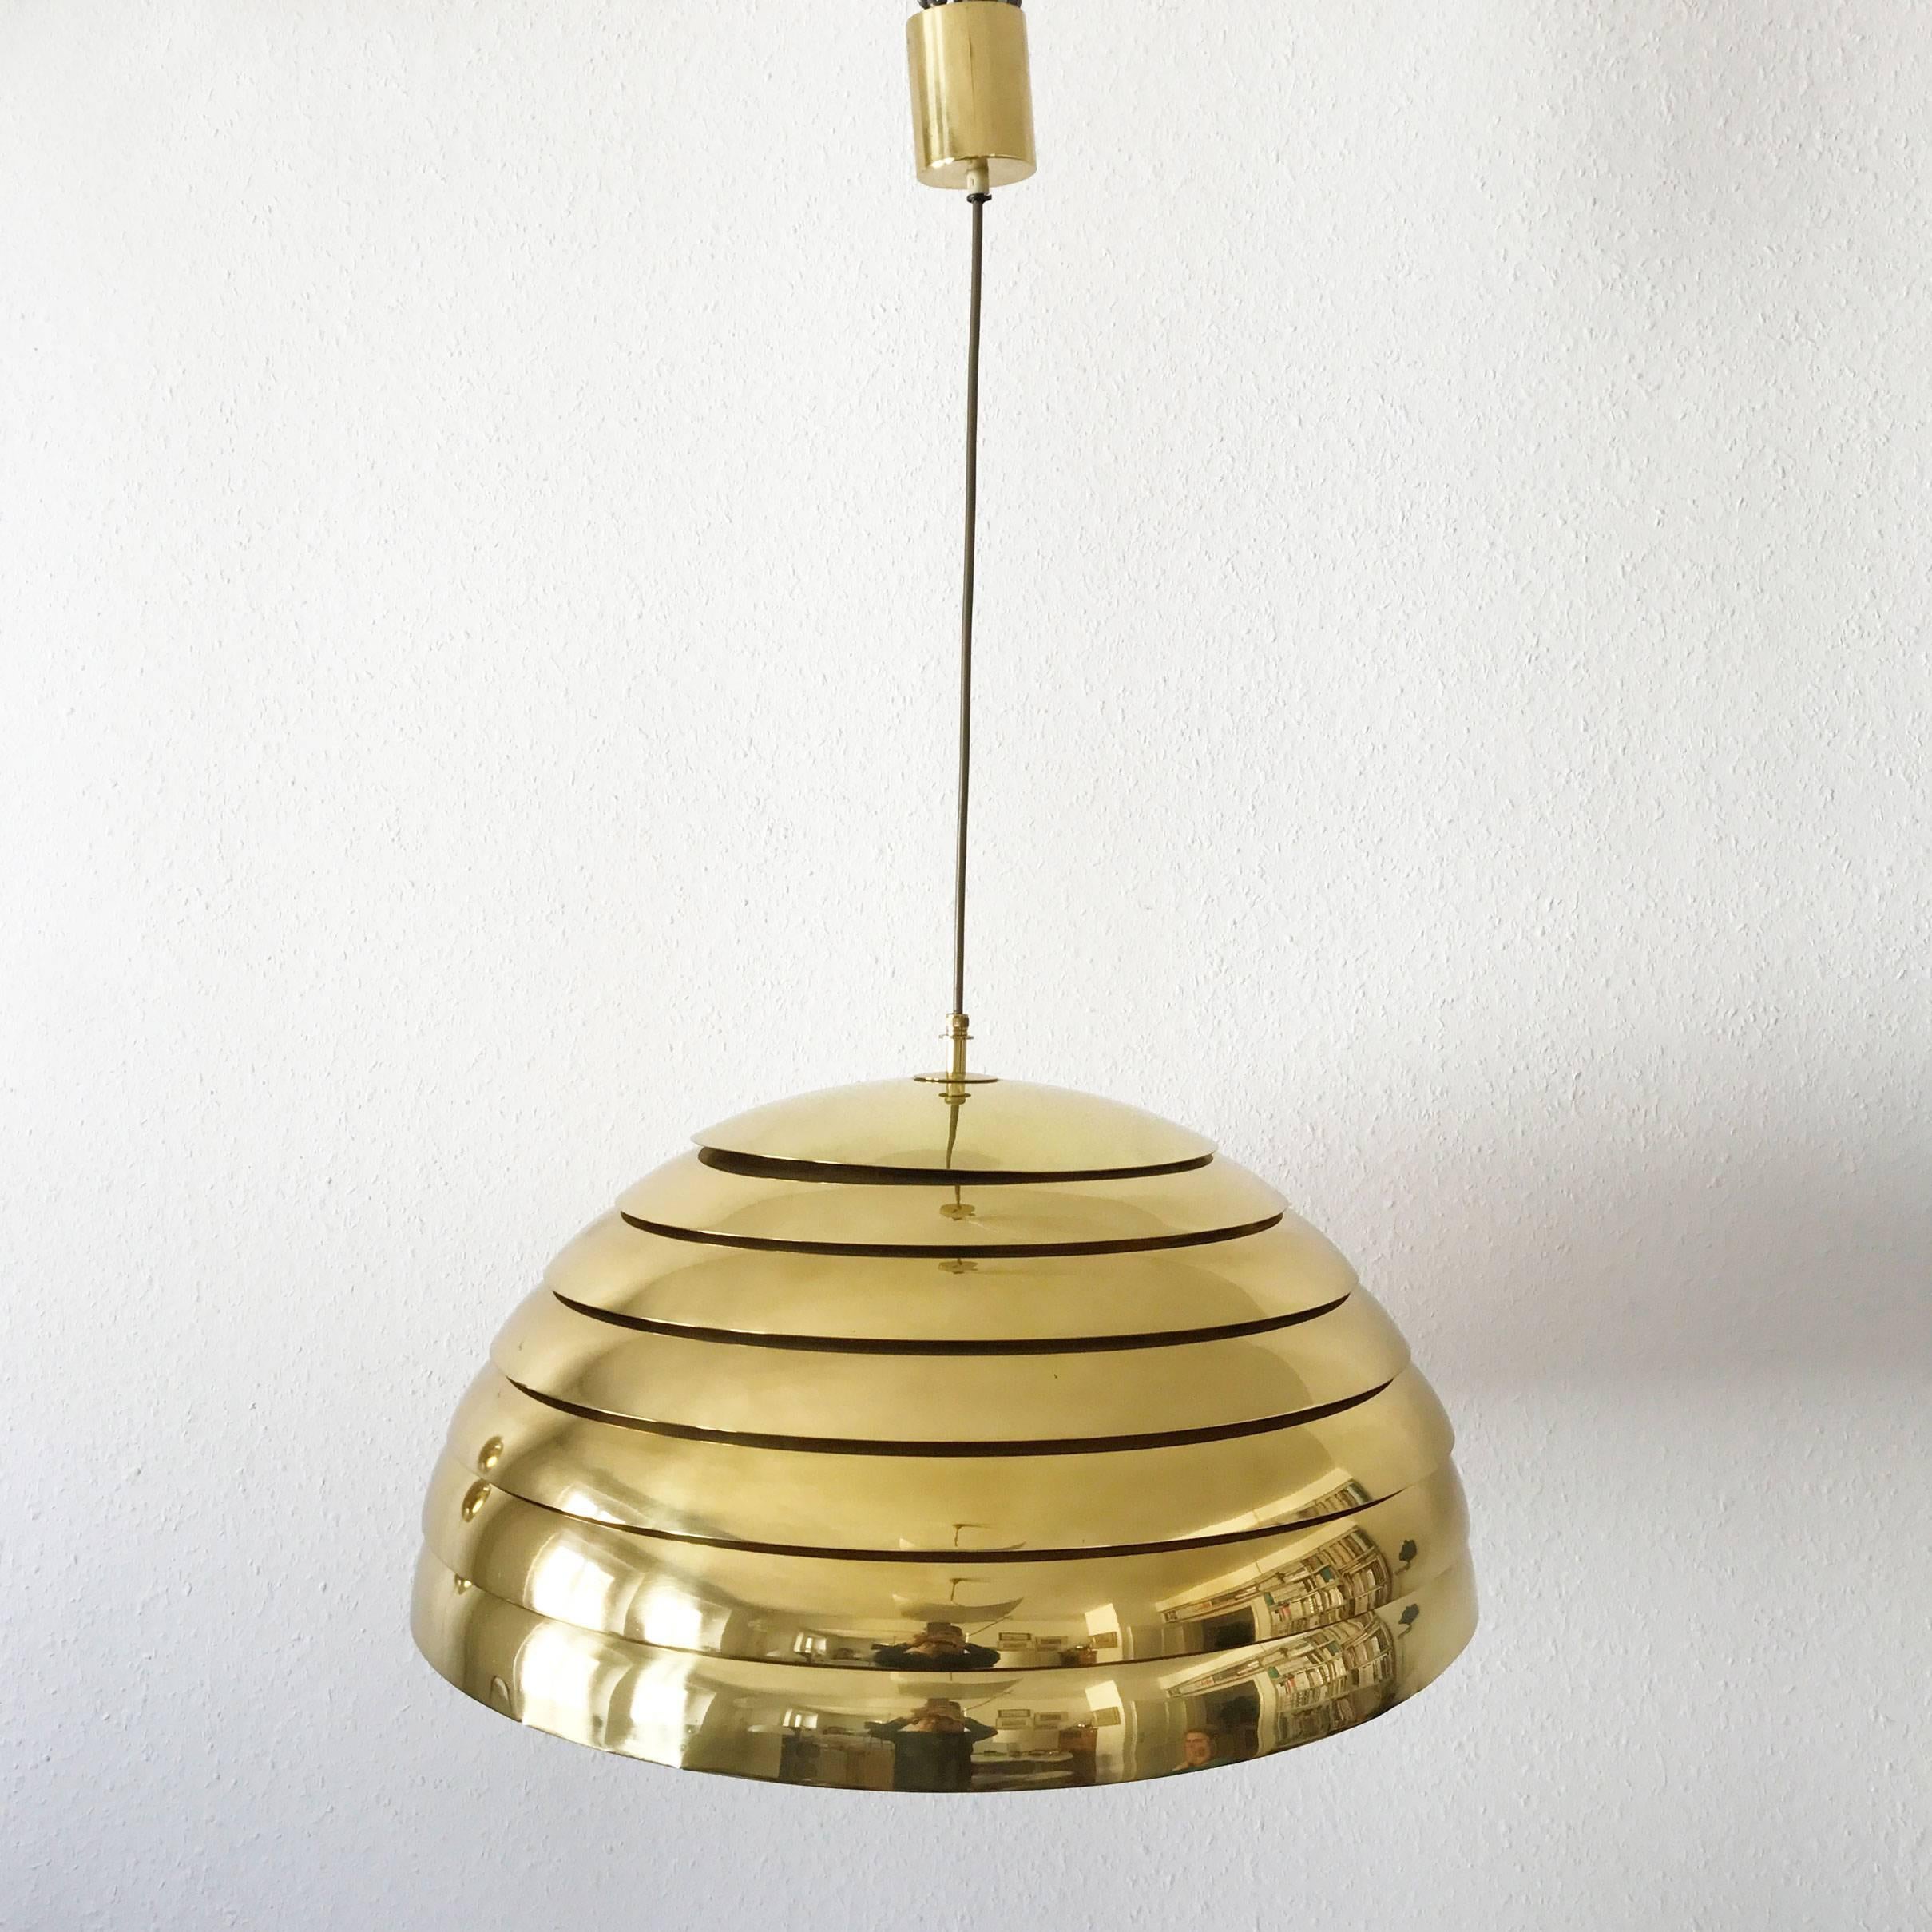 Gorgeous Mid Century Modern pendant lamp or hanging light. Manufactured by Vereinigte Werkstätten München,  Germany, 1960s. 

Executed in massive brass sheet and lucite diffuser, the pendant lamp needs 1 x E27 / E26 Edison screw fit bulb. It is